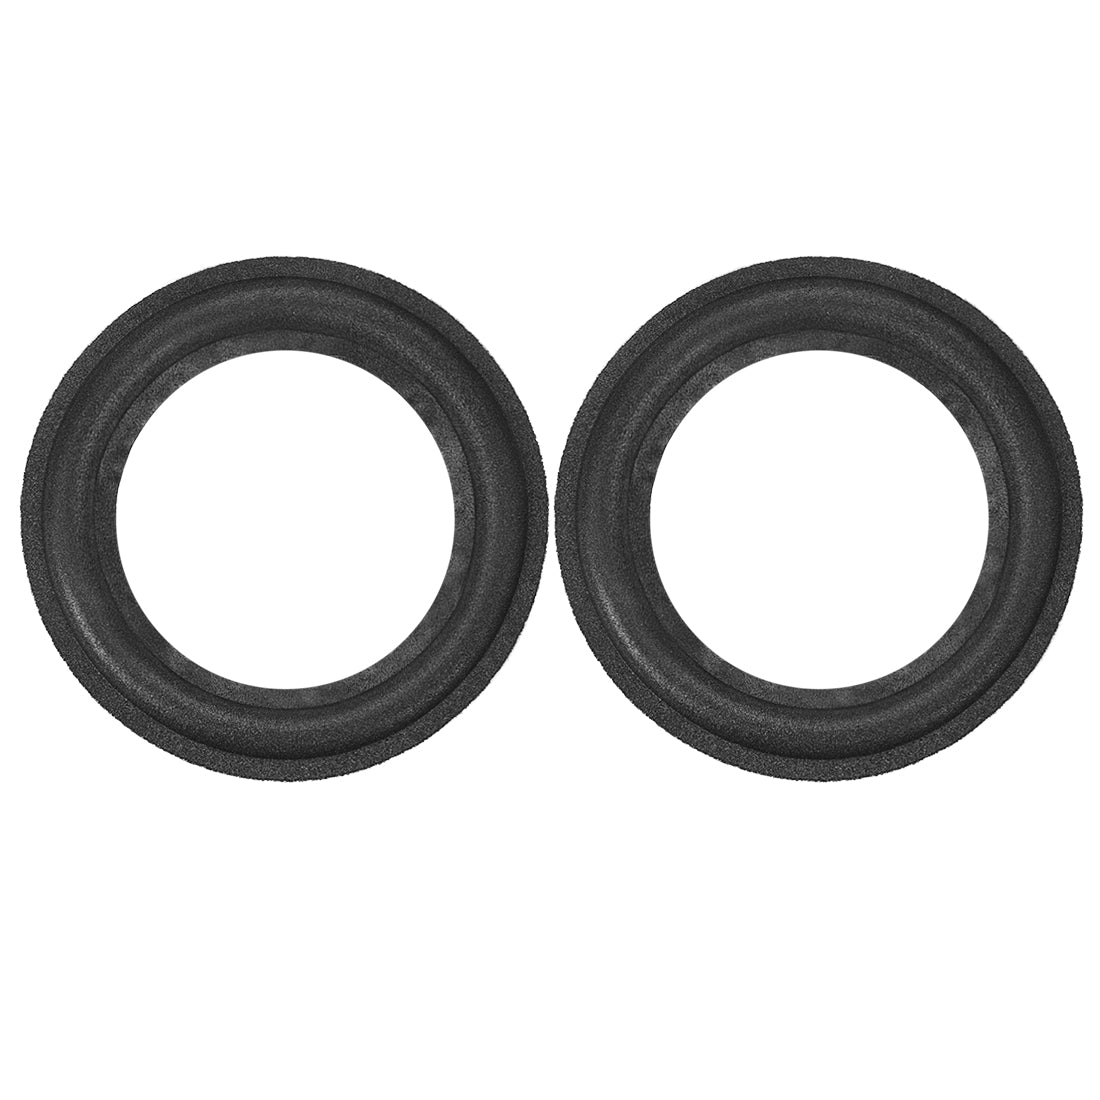 uxcell Uxcell 4" Inch Speaker Foam Edge Folding Ring  Horn Replacement Parts for Speaker Black  2 Pcs